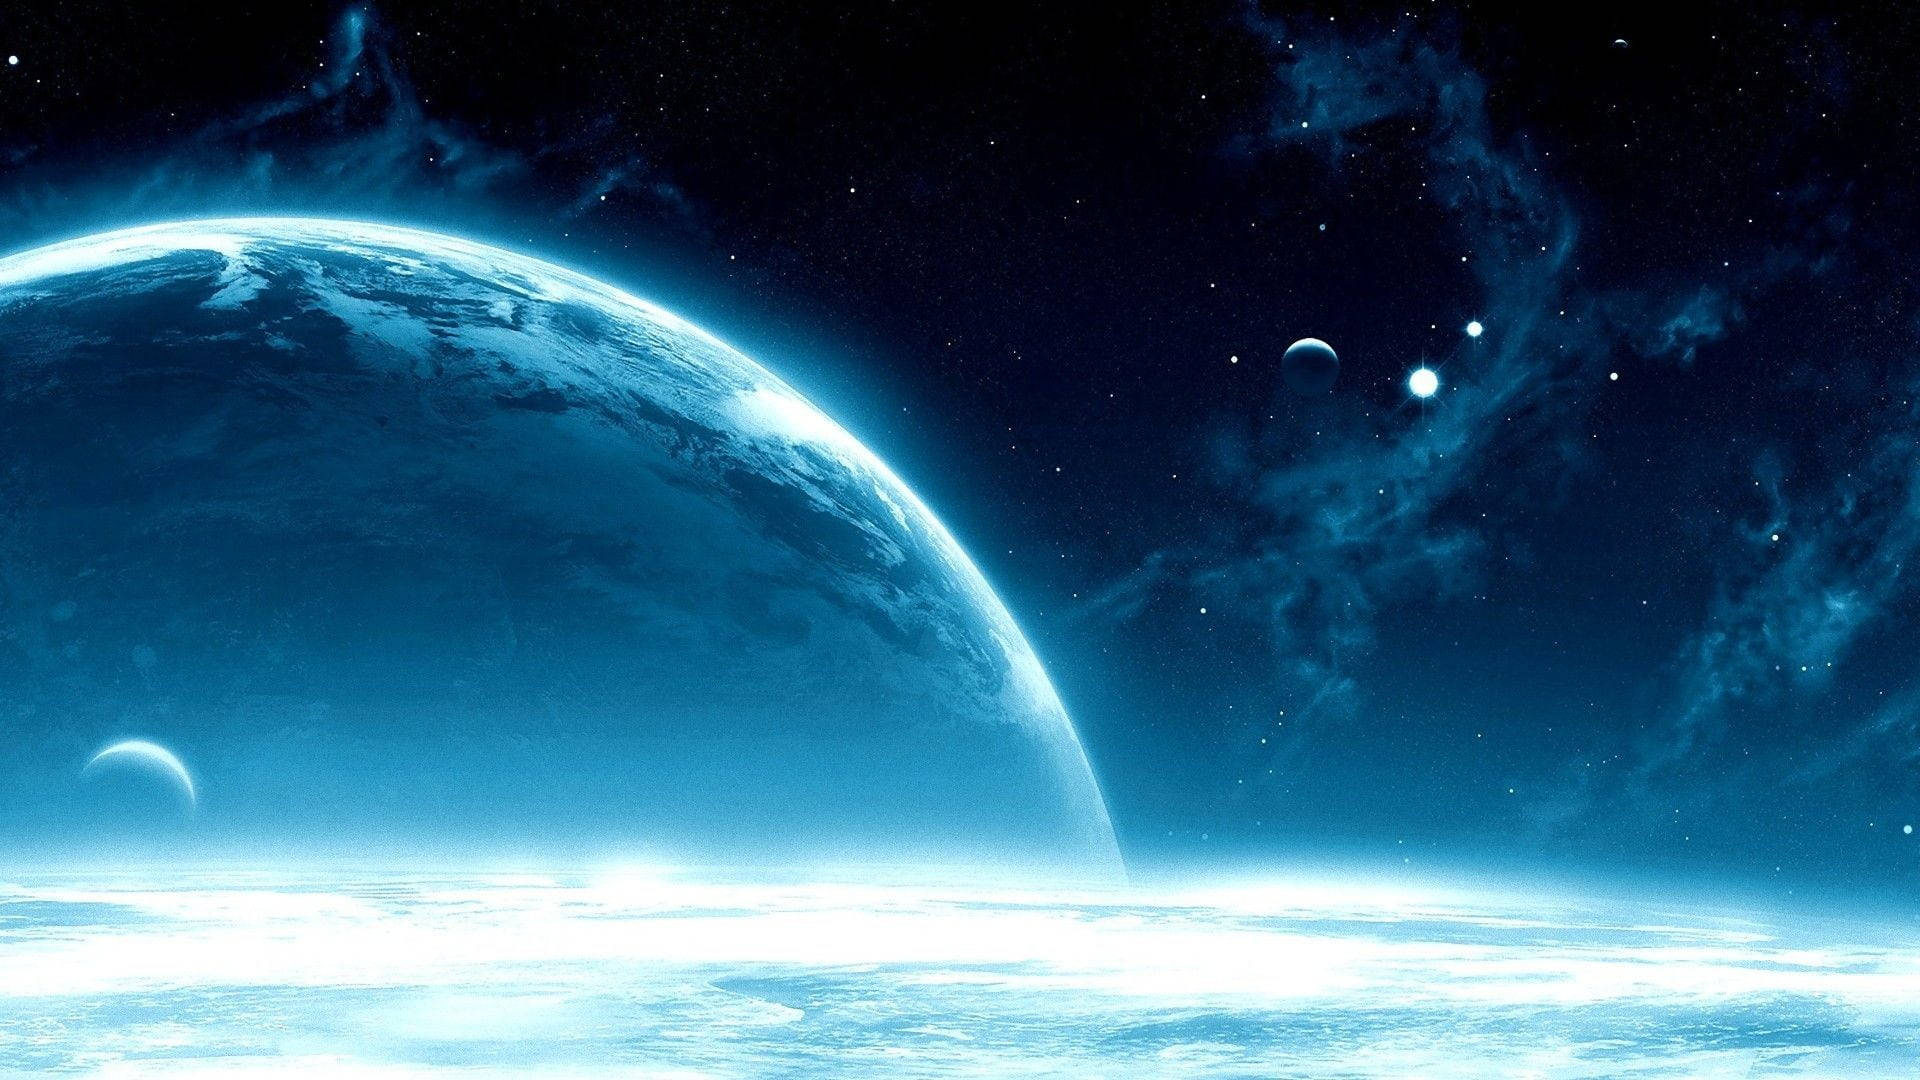 Mobile wallpaper: Anime, Planets, Sky, Art, Night, 1487 download the  picture for free.